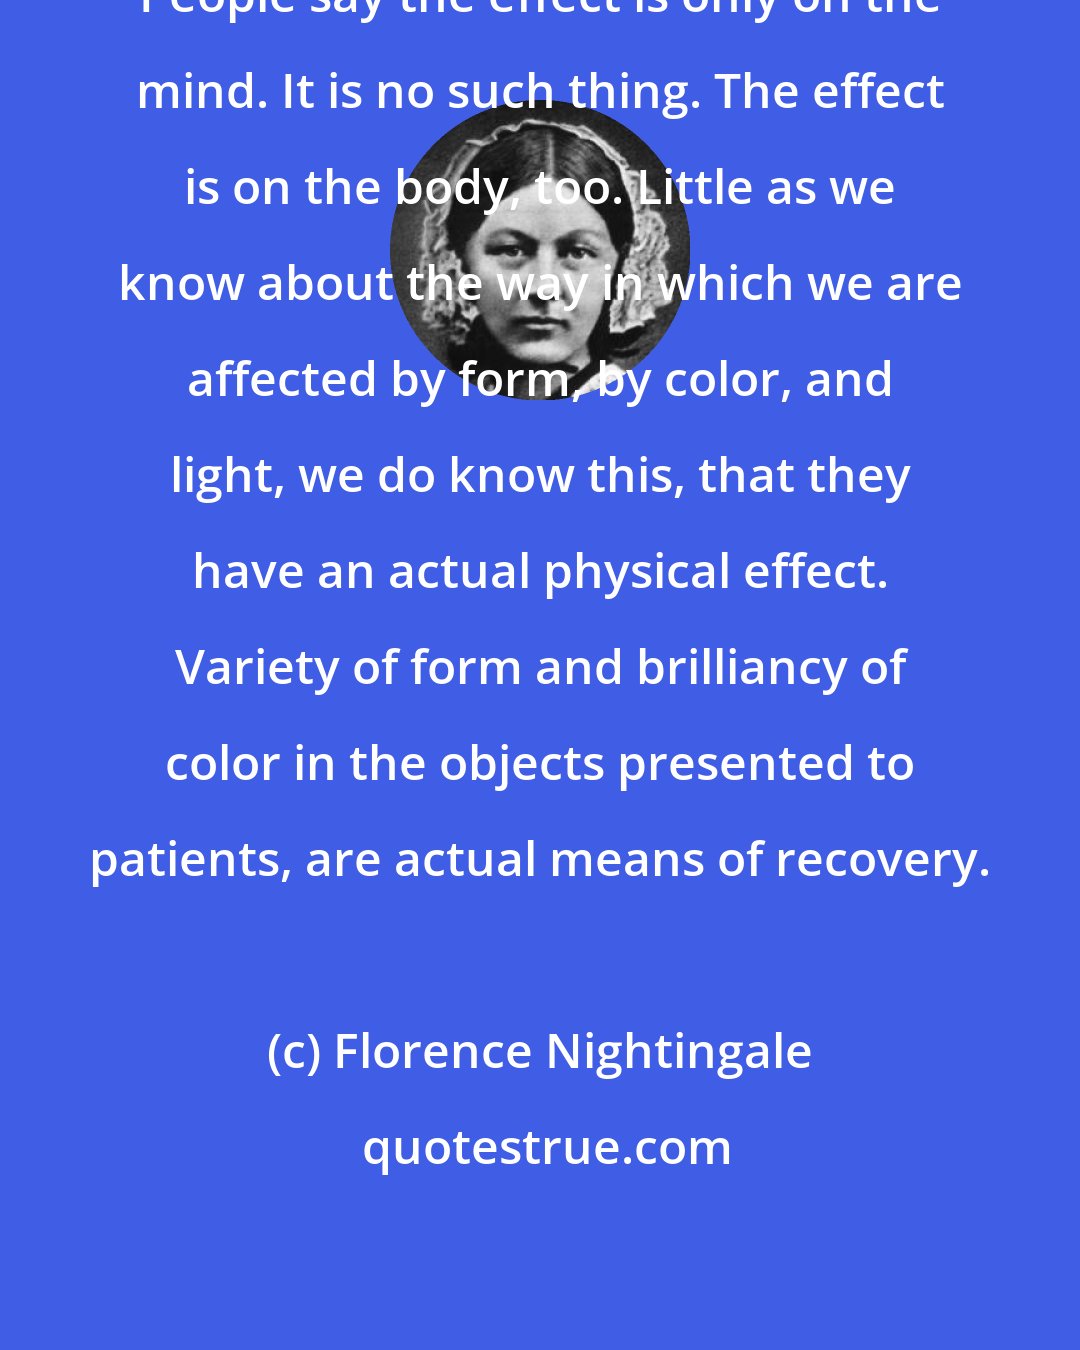 Florence Nightingale: People say the effect is only on the mind. It is no such thing. The effect is on the body, too. Little as we know about the way in which we are affected by form, by color, and light, we do know this, that they have an actual physical effect. Variety of form and brilliancy of color in the objects presented to patients, are actual means of recovery.